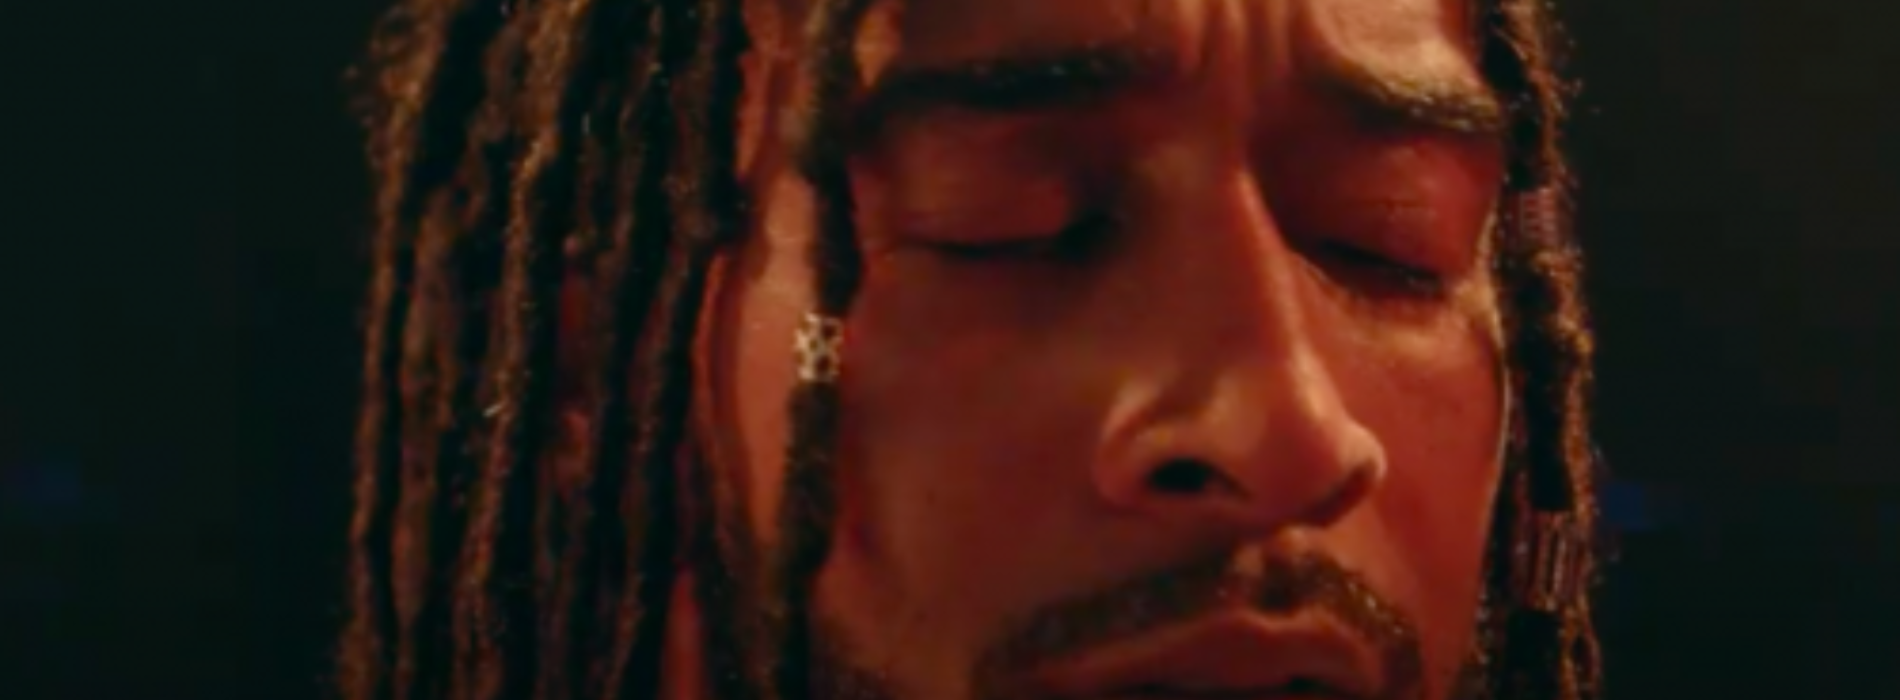 Omarion – Involved (Official Music Video) – Octobre 2020